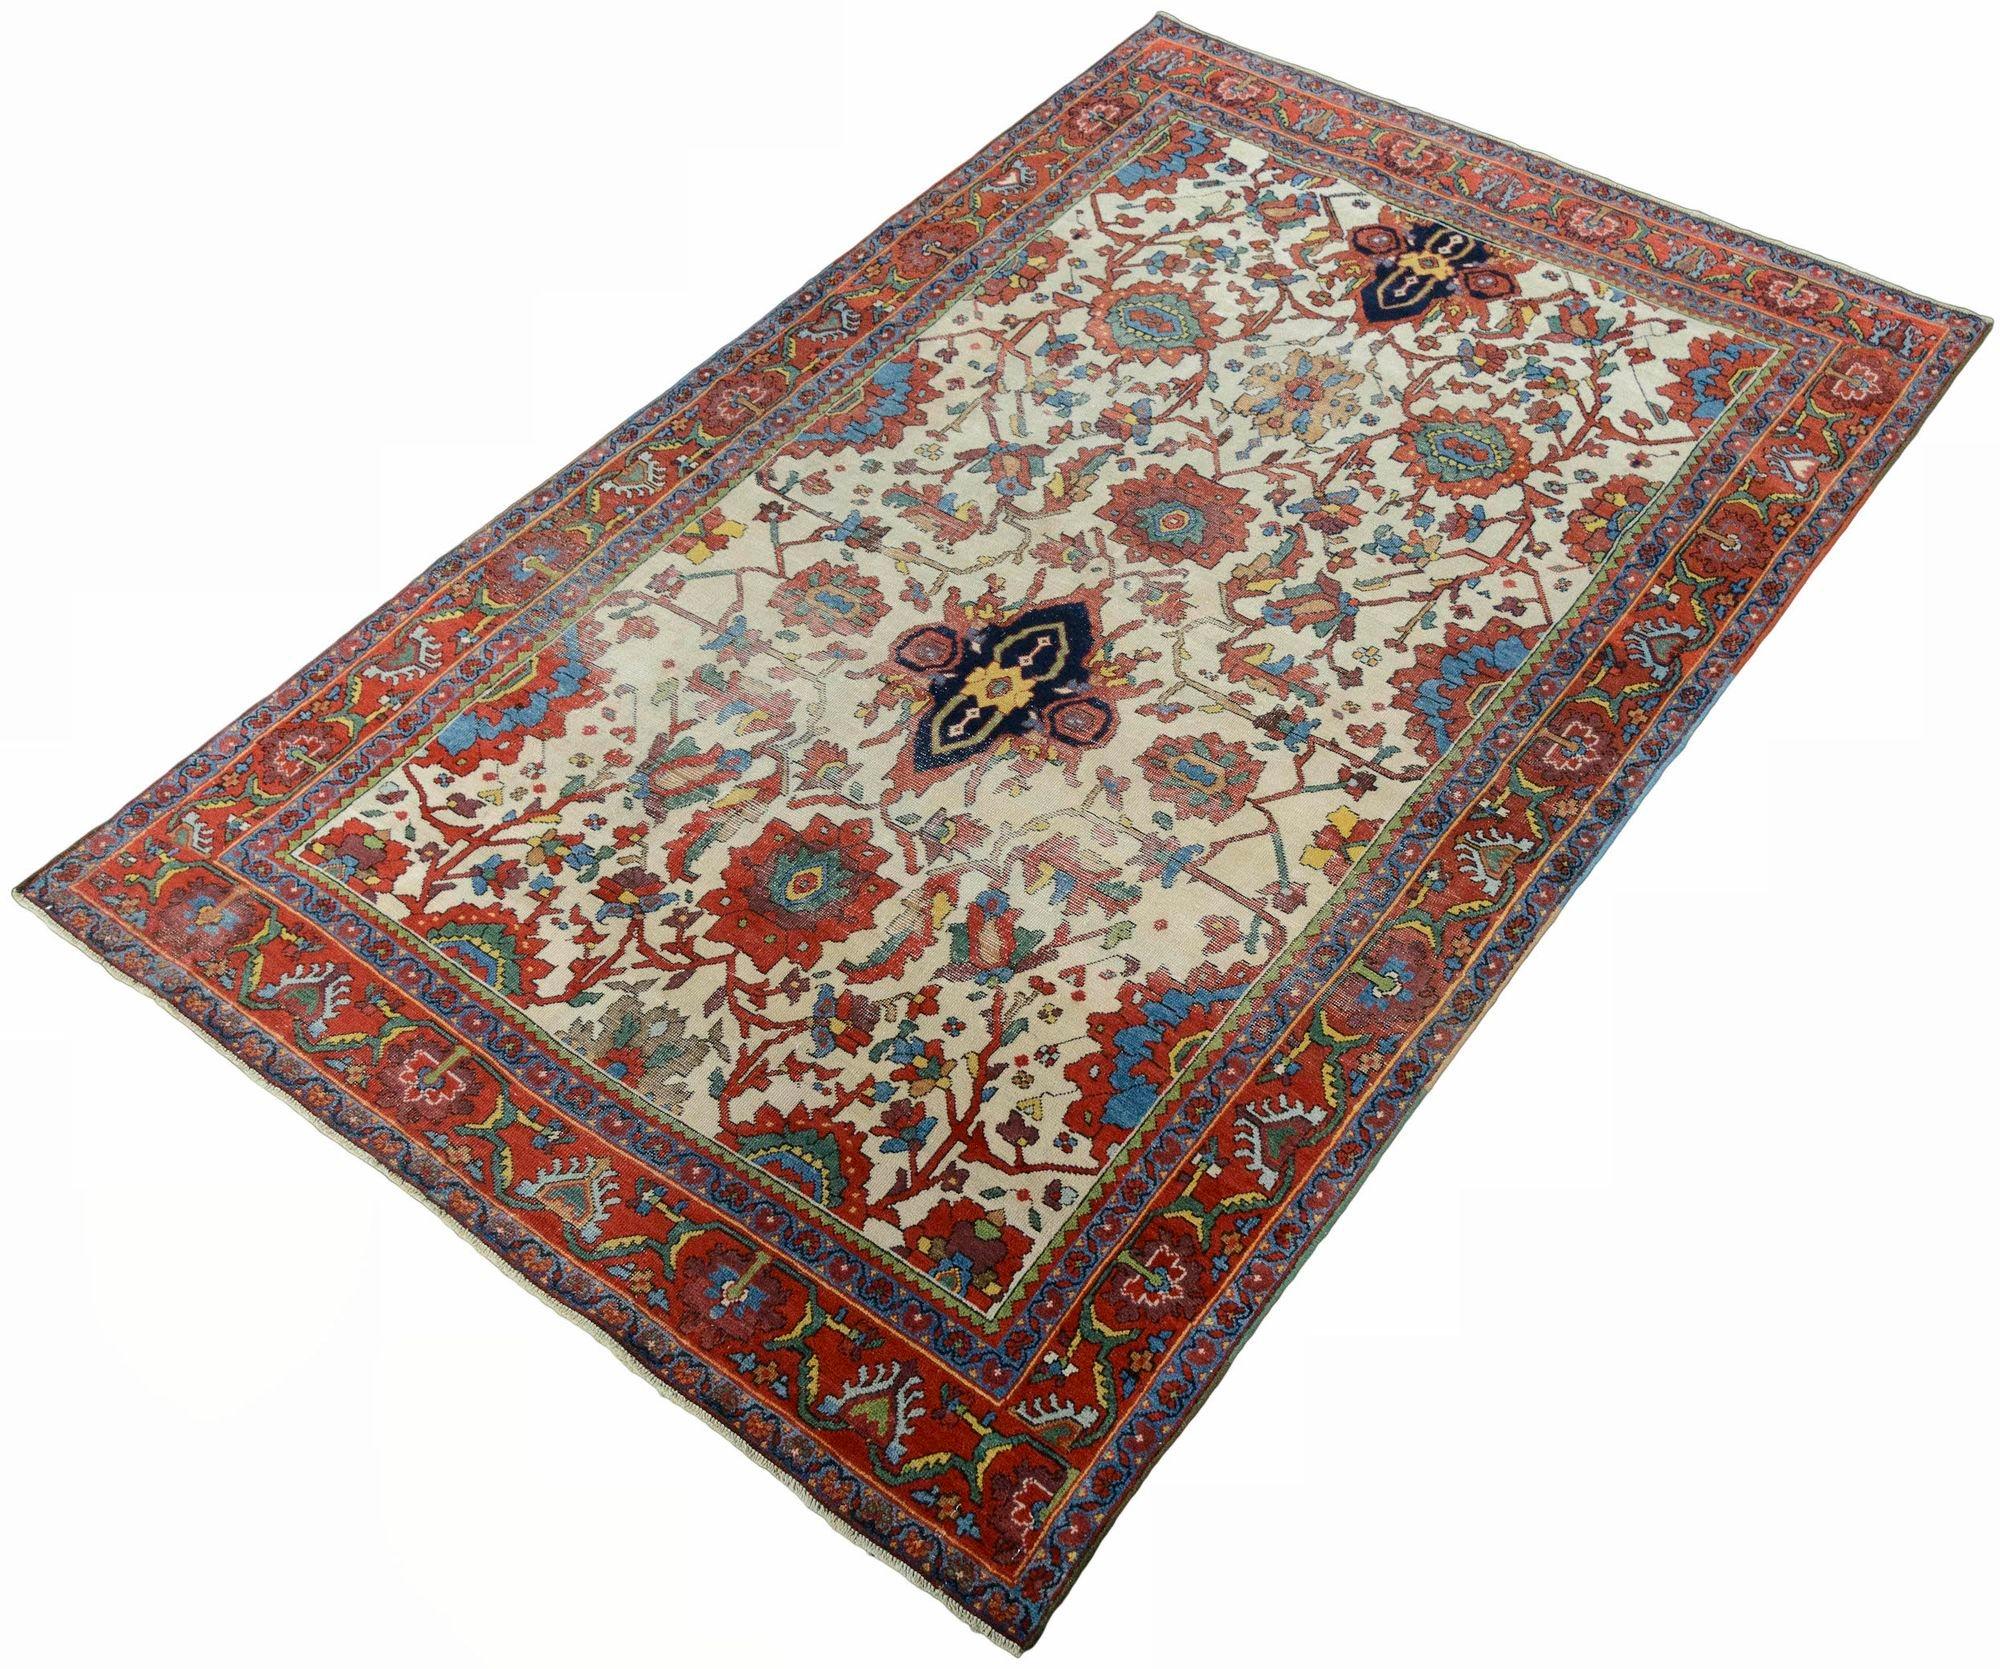 Antique Ferahan Rug 1.97m x 1.24m In Fair Condition For Sale In St. Albans, GB